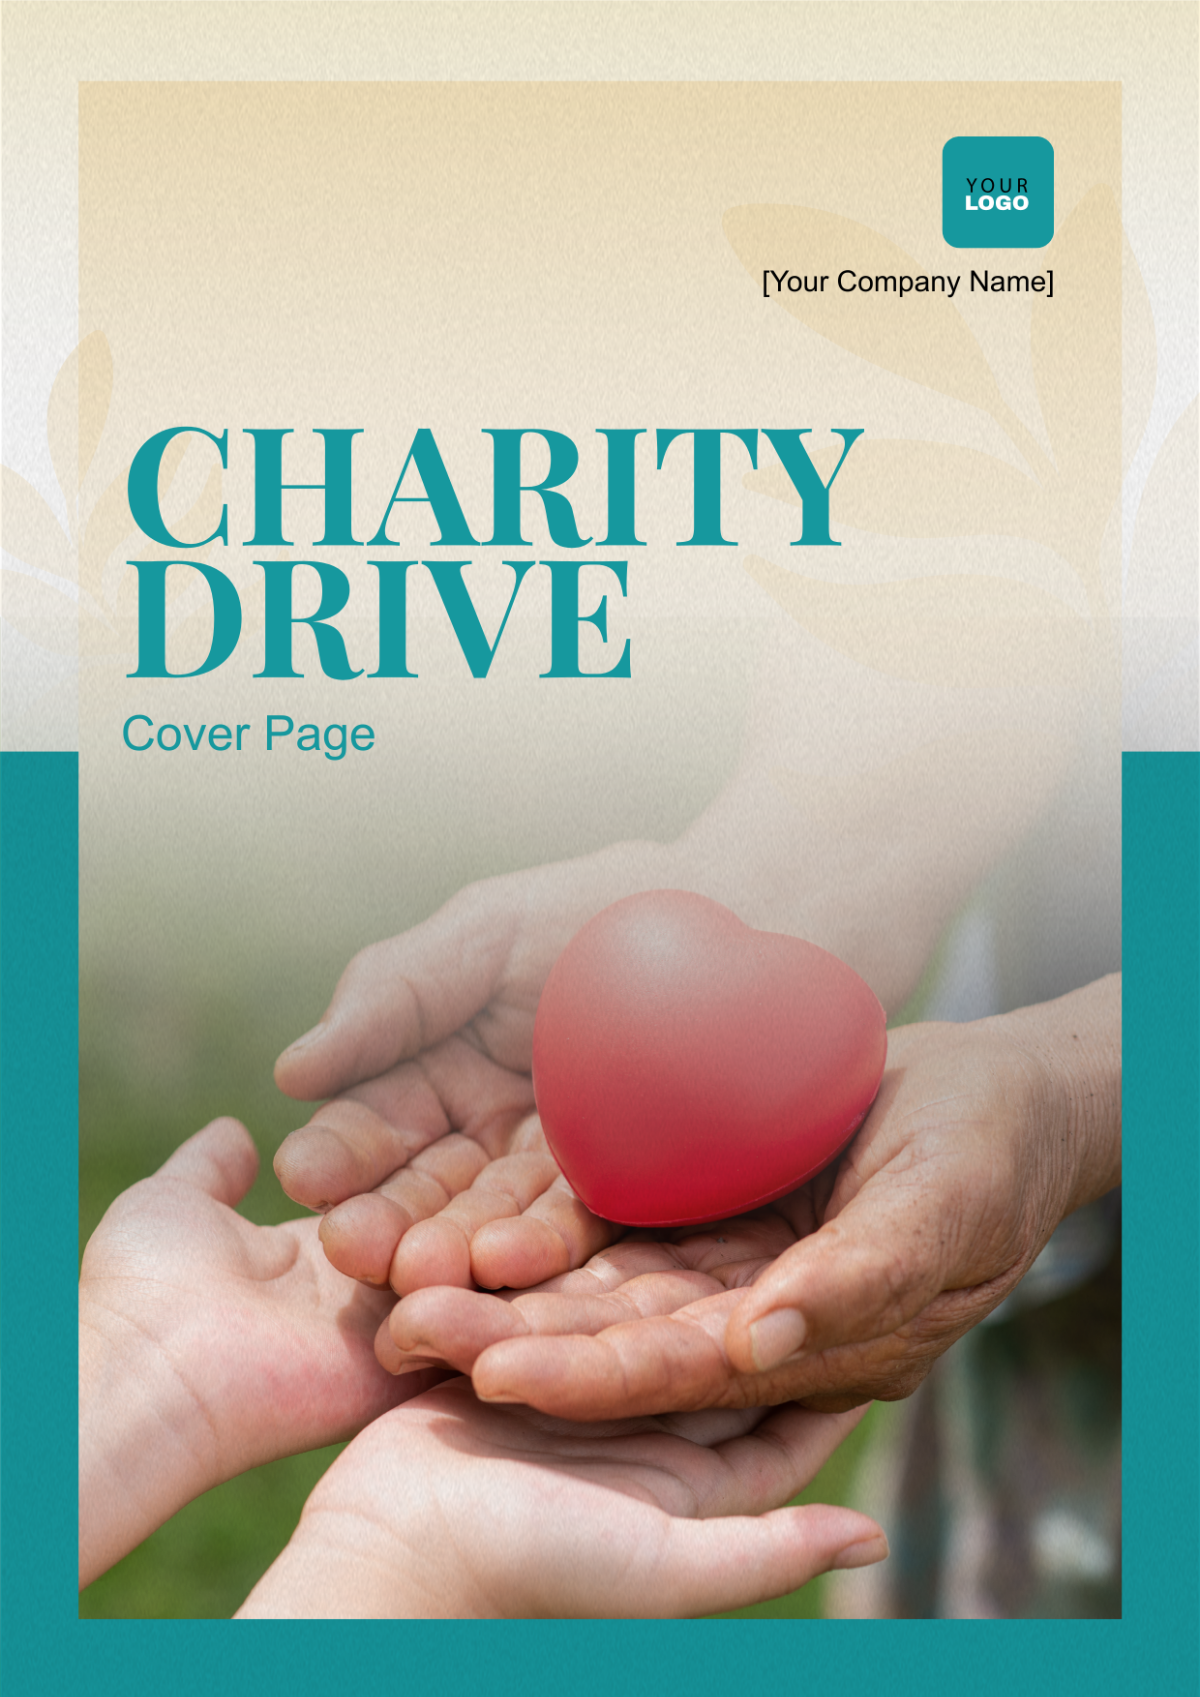 Charity Drive Cover Page Template